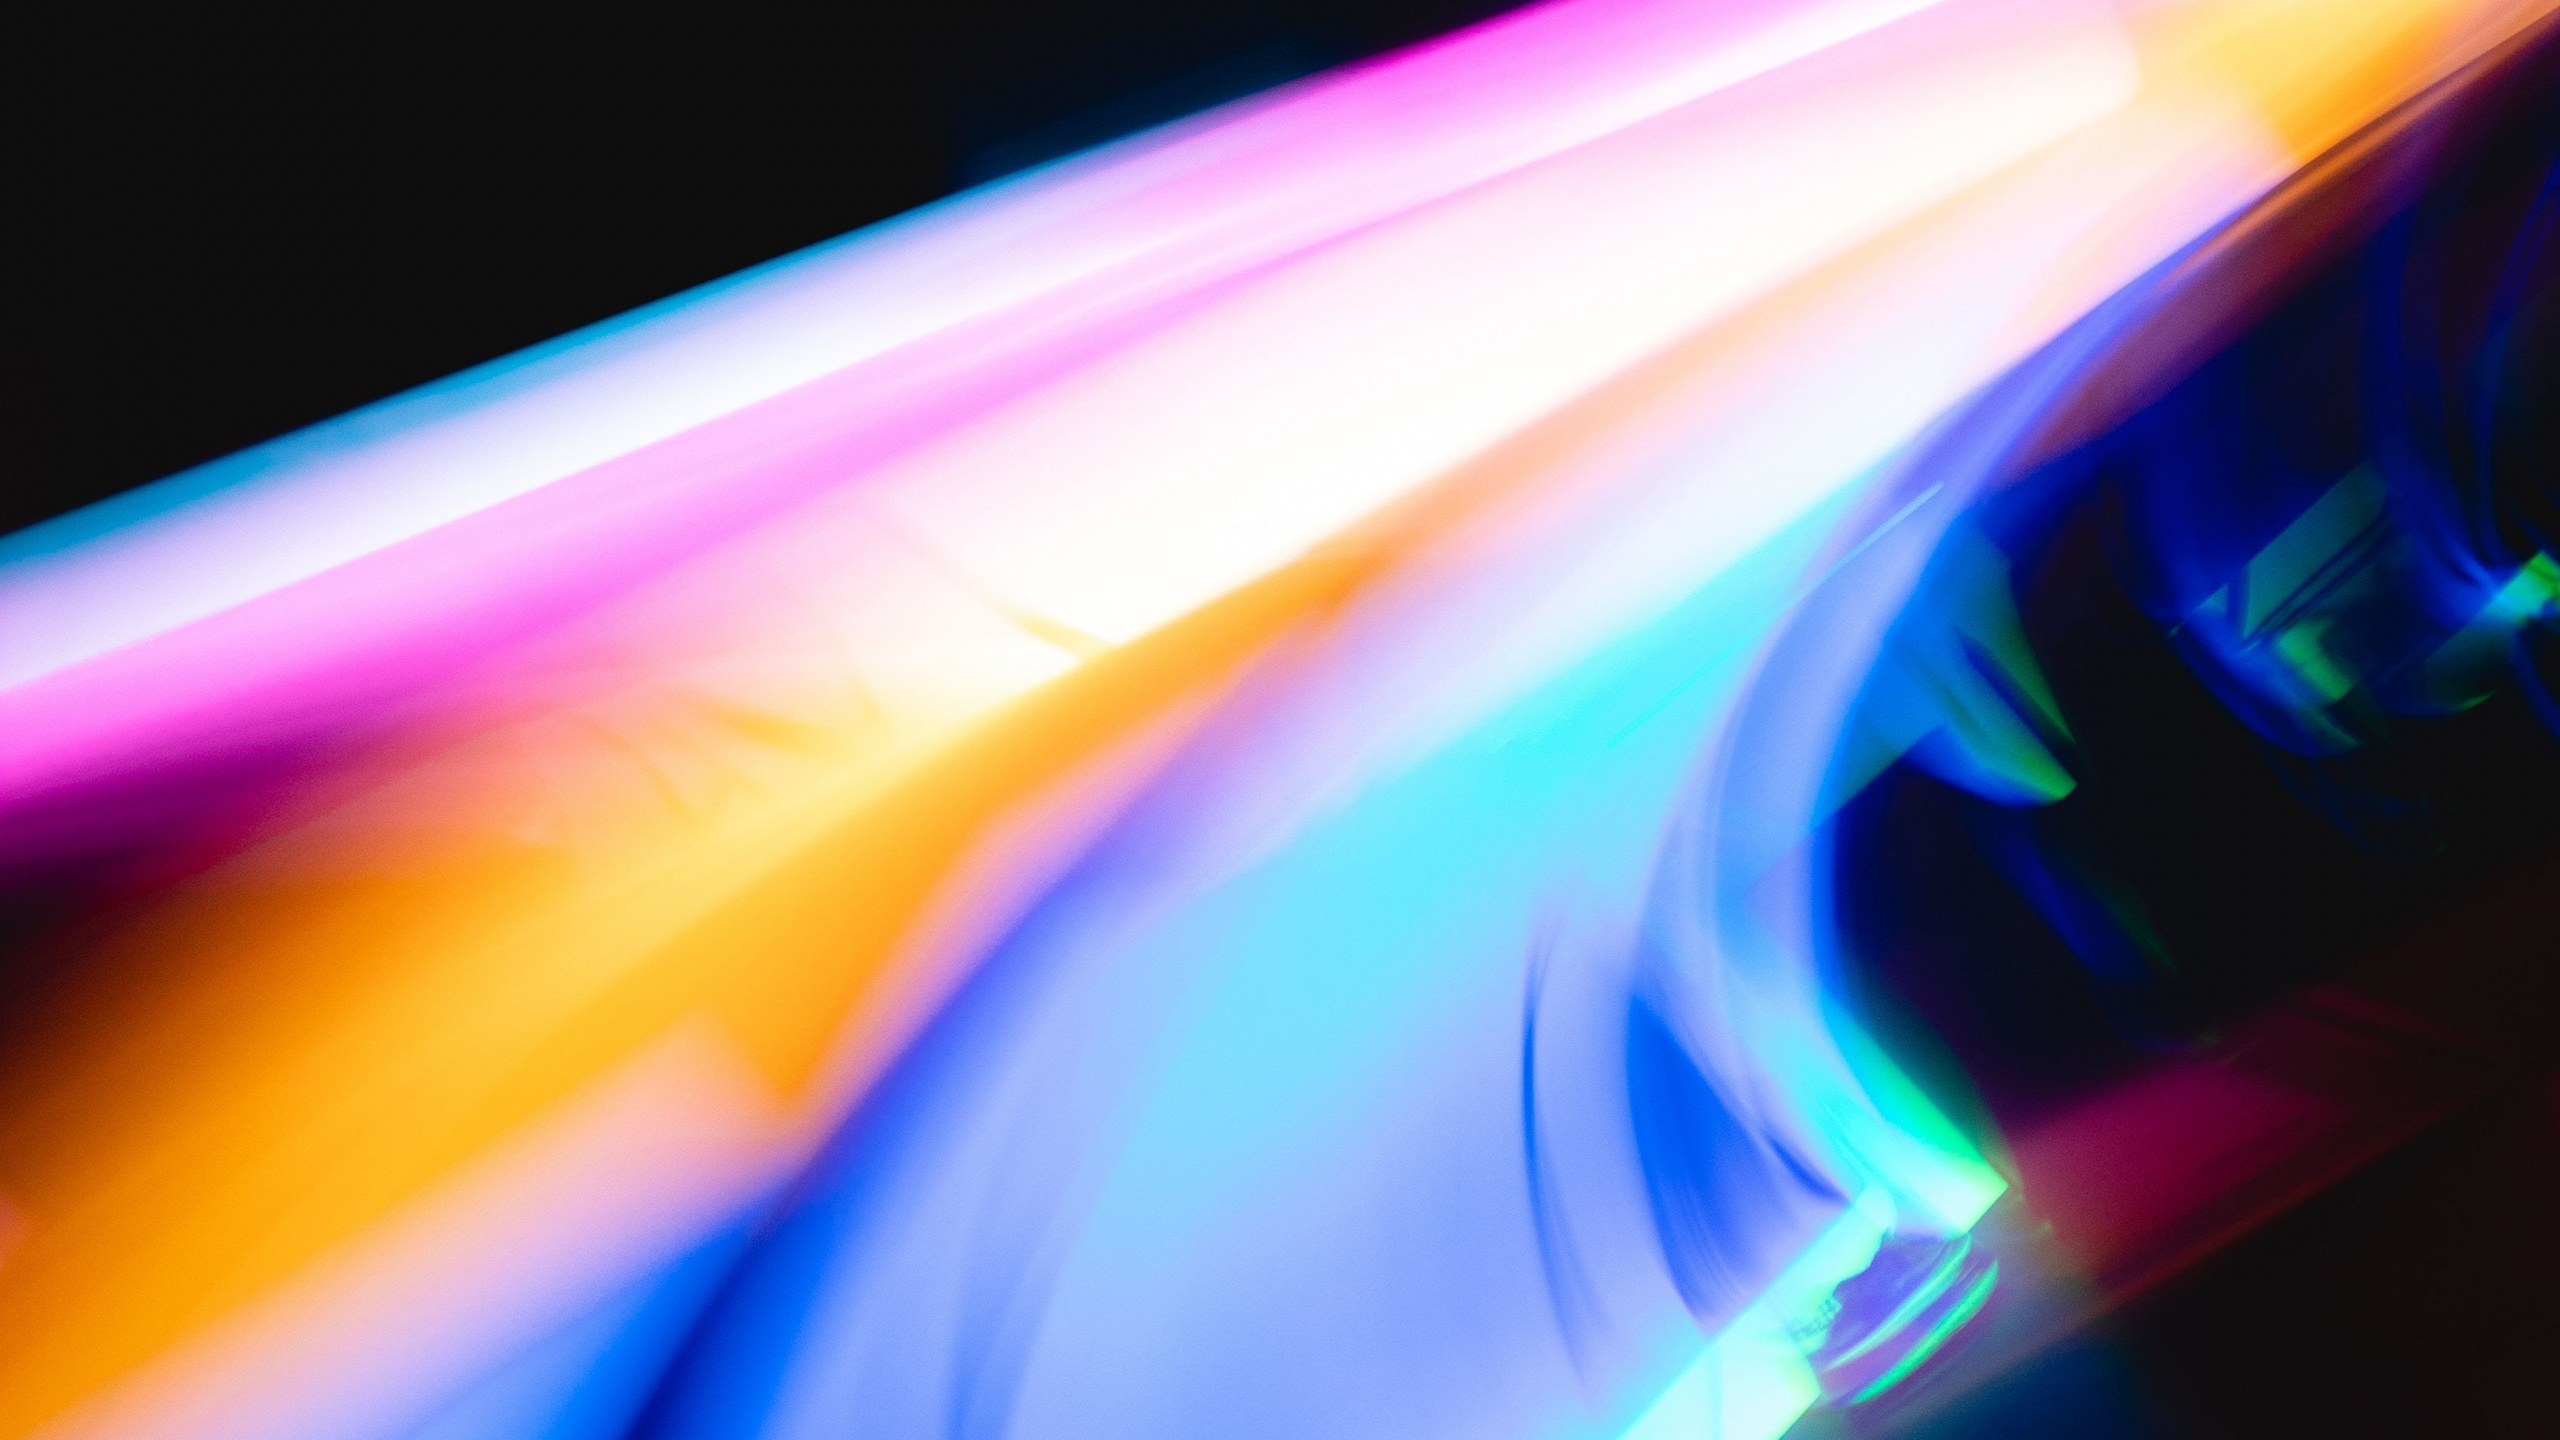 Download wallpaper 2560x1440 neon, flare, colorful, close up, dual wide ...